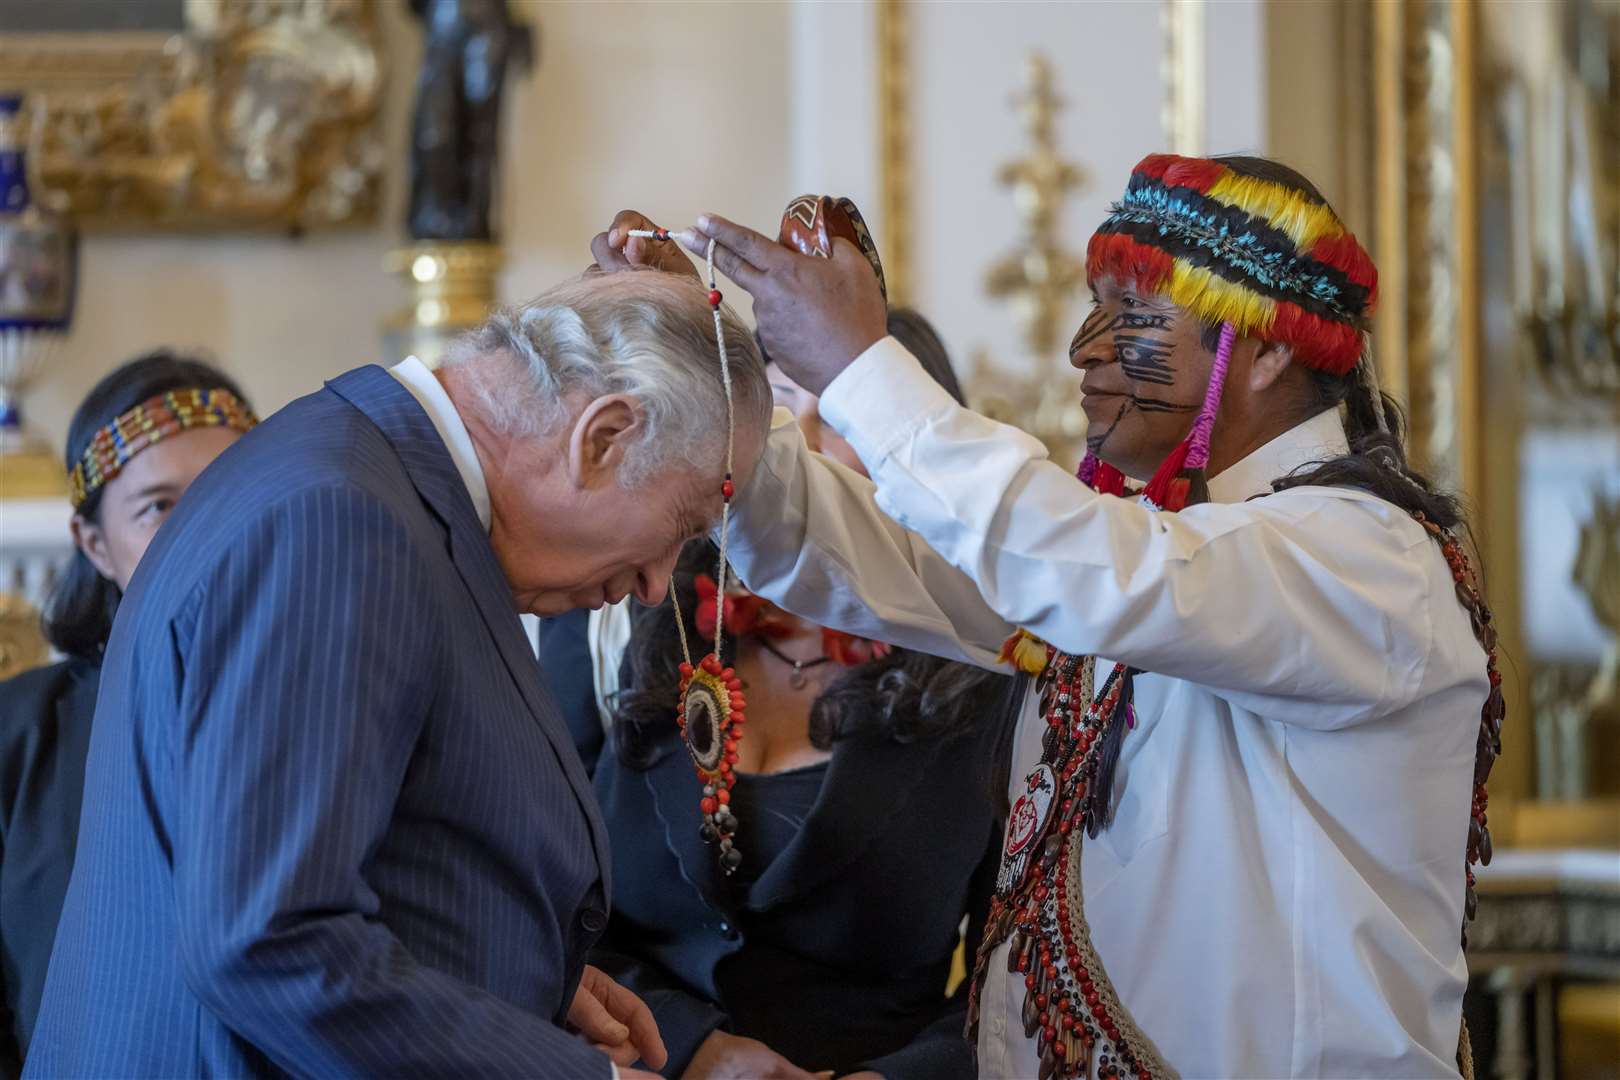 Amazon Indigenous leader Domingo Peas presents a gift to the King during a reception (Kin Cheung/PA)